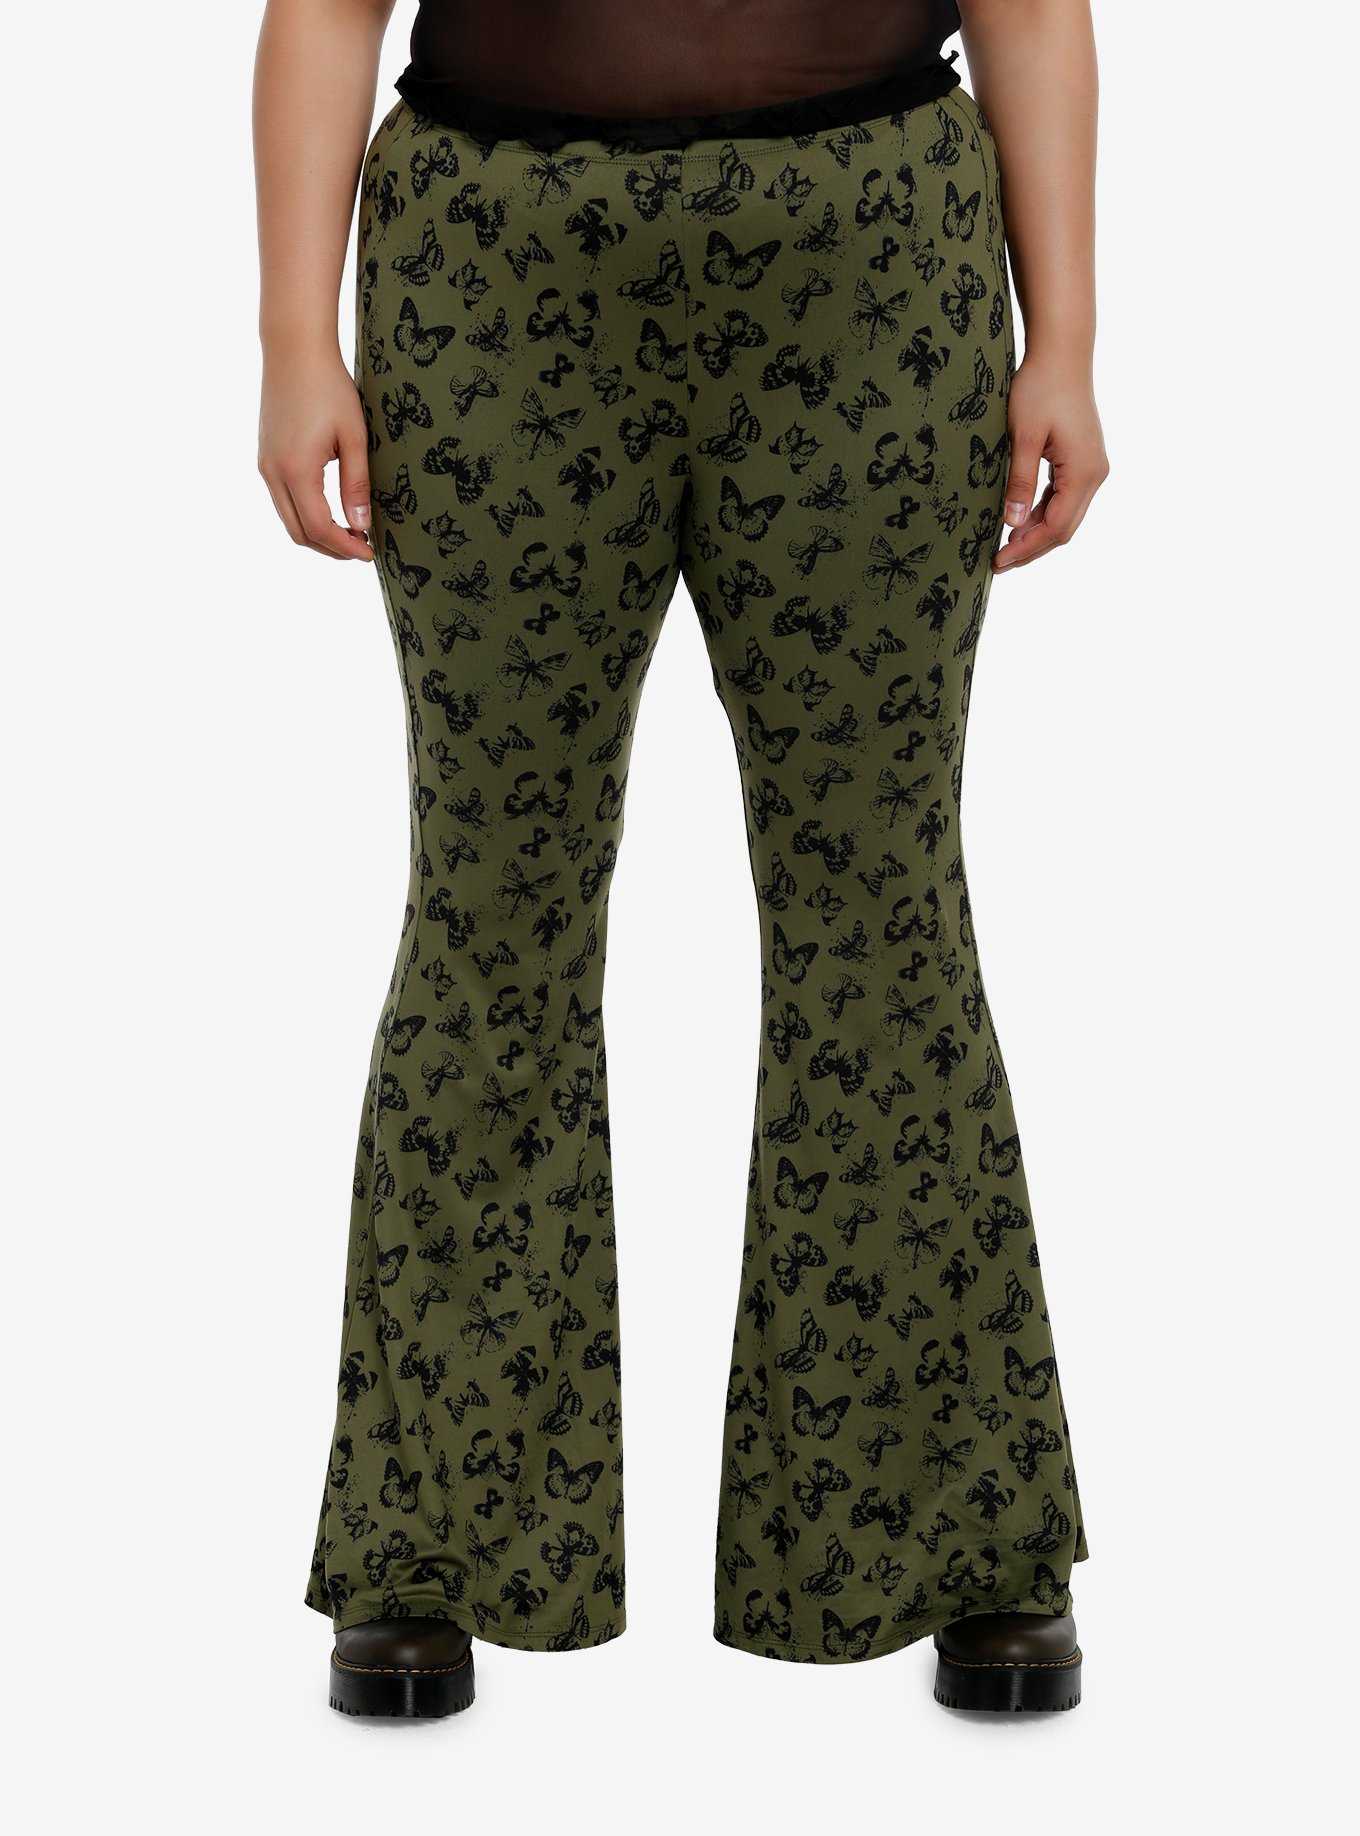 Women's High-Waisted Flare Leggings - Wild Fable Olive Green S 1 ct